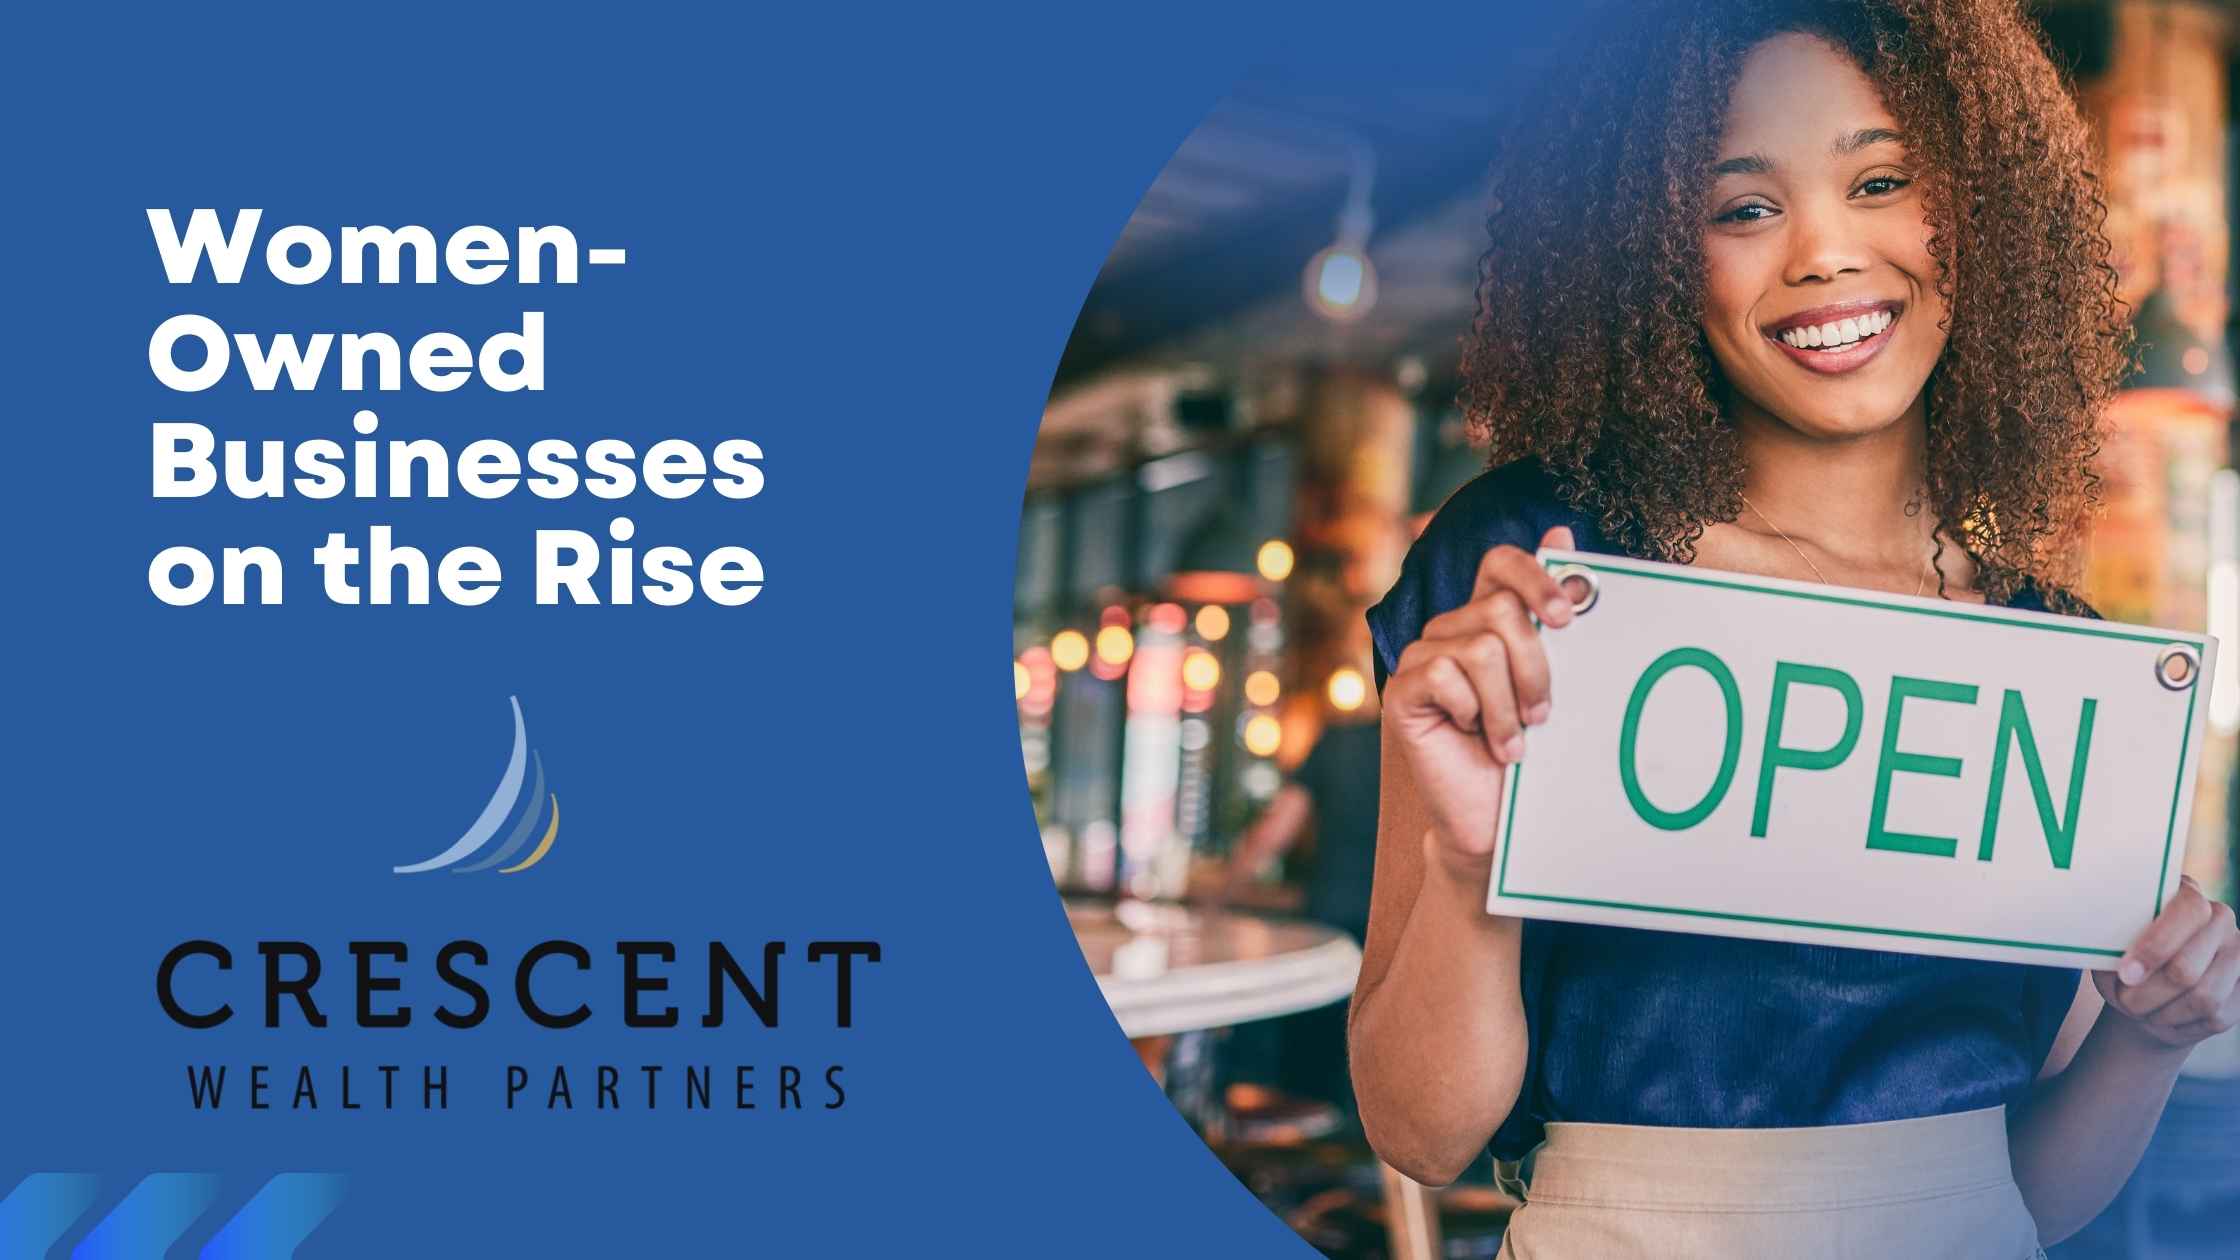 Women-Owned Businesses on the Rise